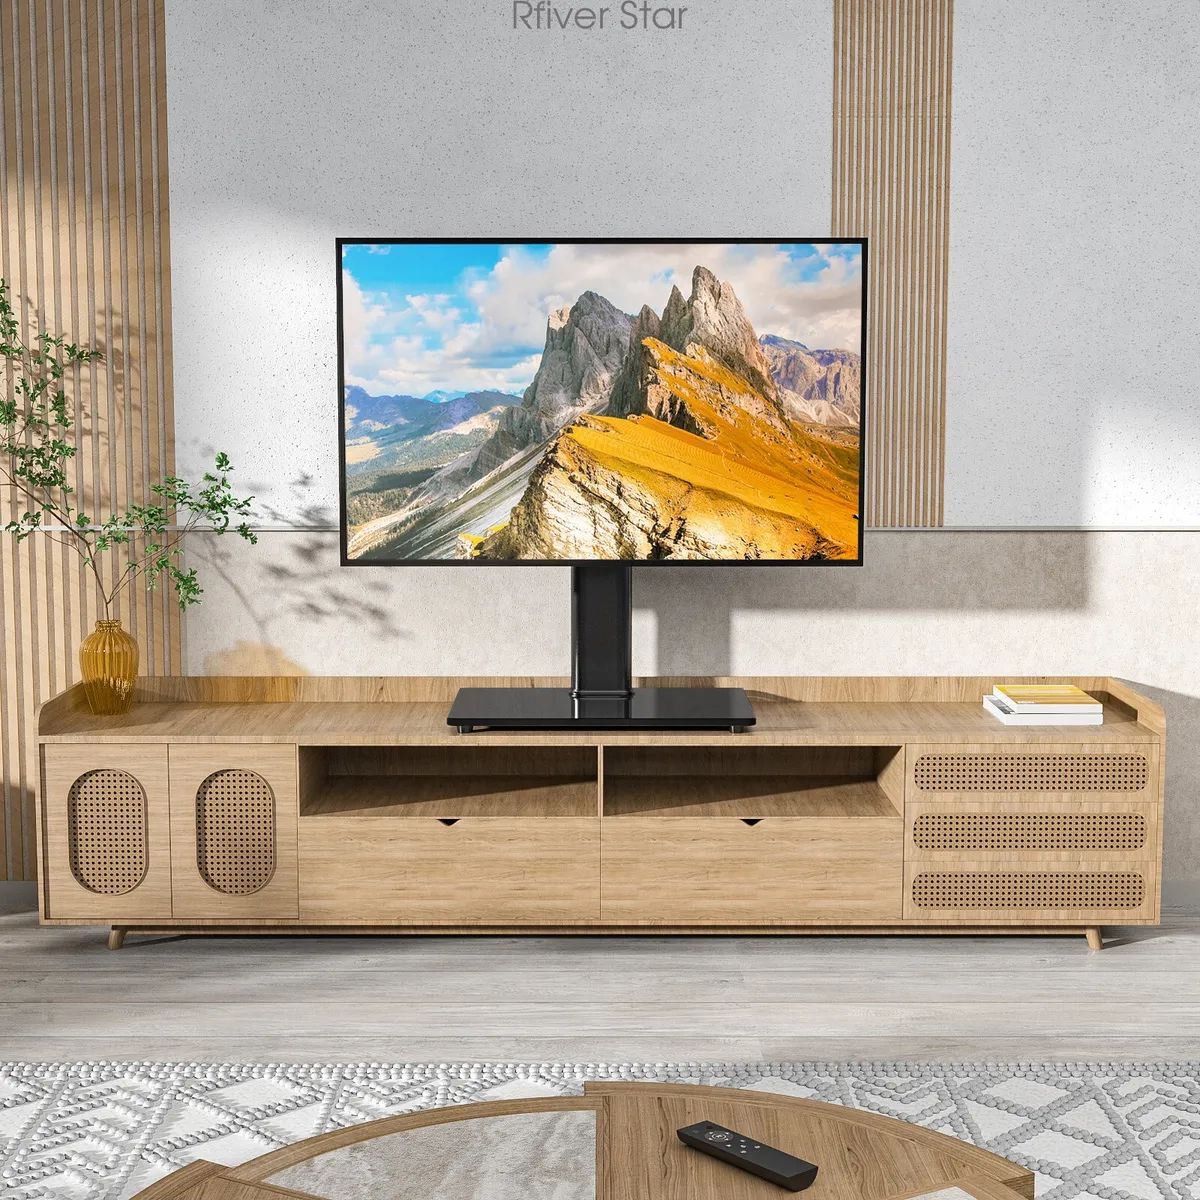 Universal Swivel Tabletop Tv Stand For Flat Screens 23 24 26 32 39 40 43  Inch Tv | Ebay Throughout Universal Tabletop Tv Stands (Photo 2 of 15)